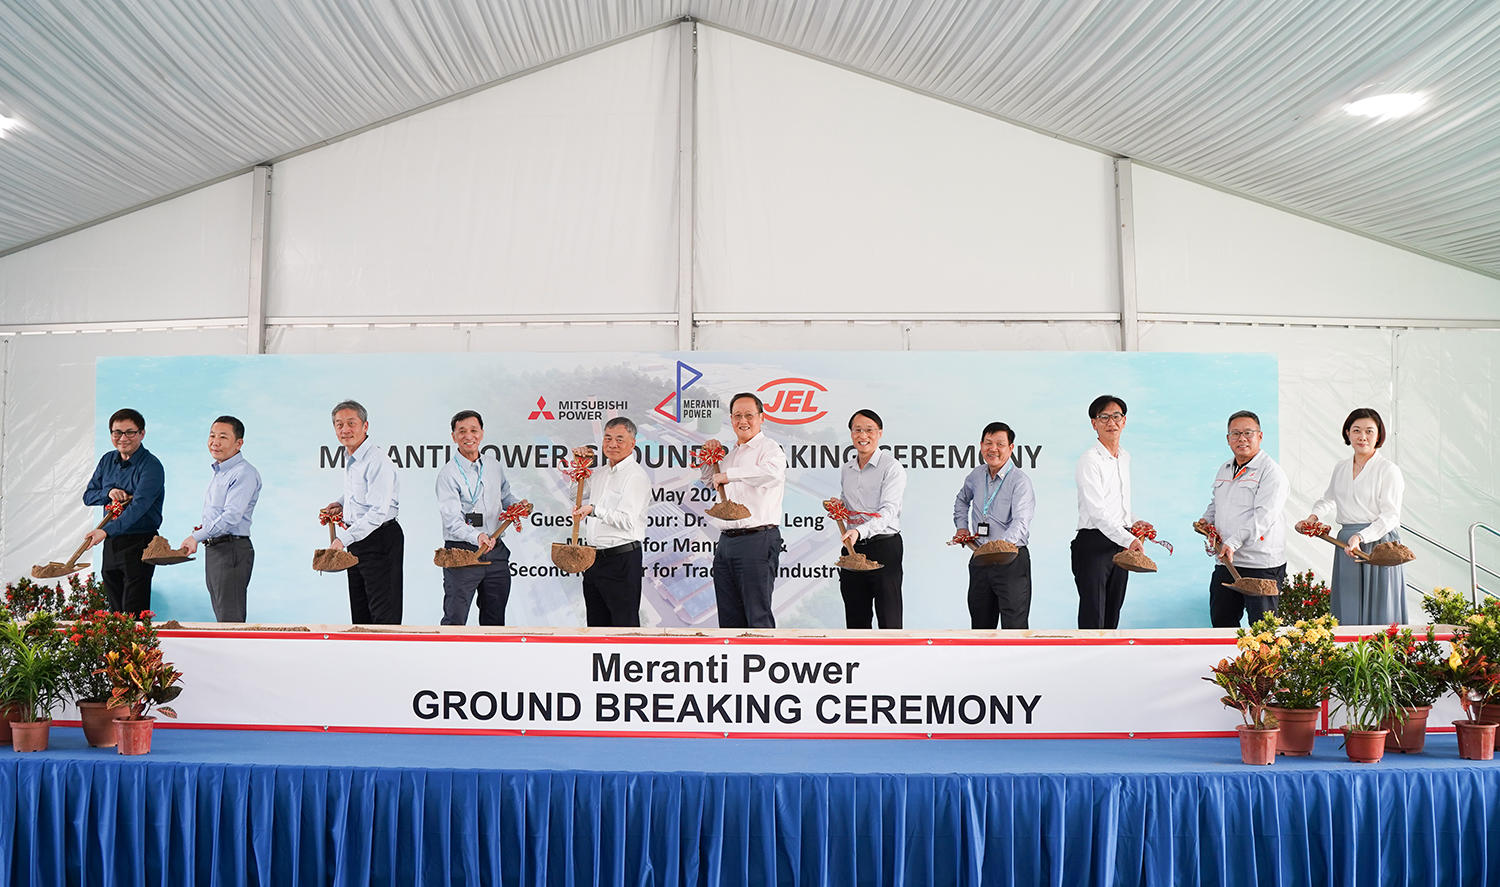 Takao Tsukui, EVP, Mitsubishi Power (third from left) and Akihiro Ondo, CEO and MD, Mitsubishi Power Asia Pacific (second from left) at the Groundbreaking Ceremony of Meranti Power's first-ever power plant along with Minister for Manpower & Second Minister for Trade and Industry Dr Tan See Leng (center), Richard Lim, Chairman of EMA (fifth from left) and Ngiam Shih Chun, CE, EMA (fifth from right)